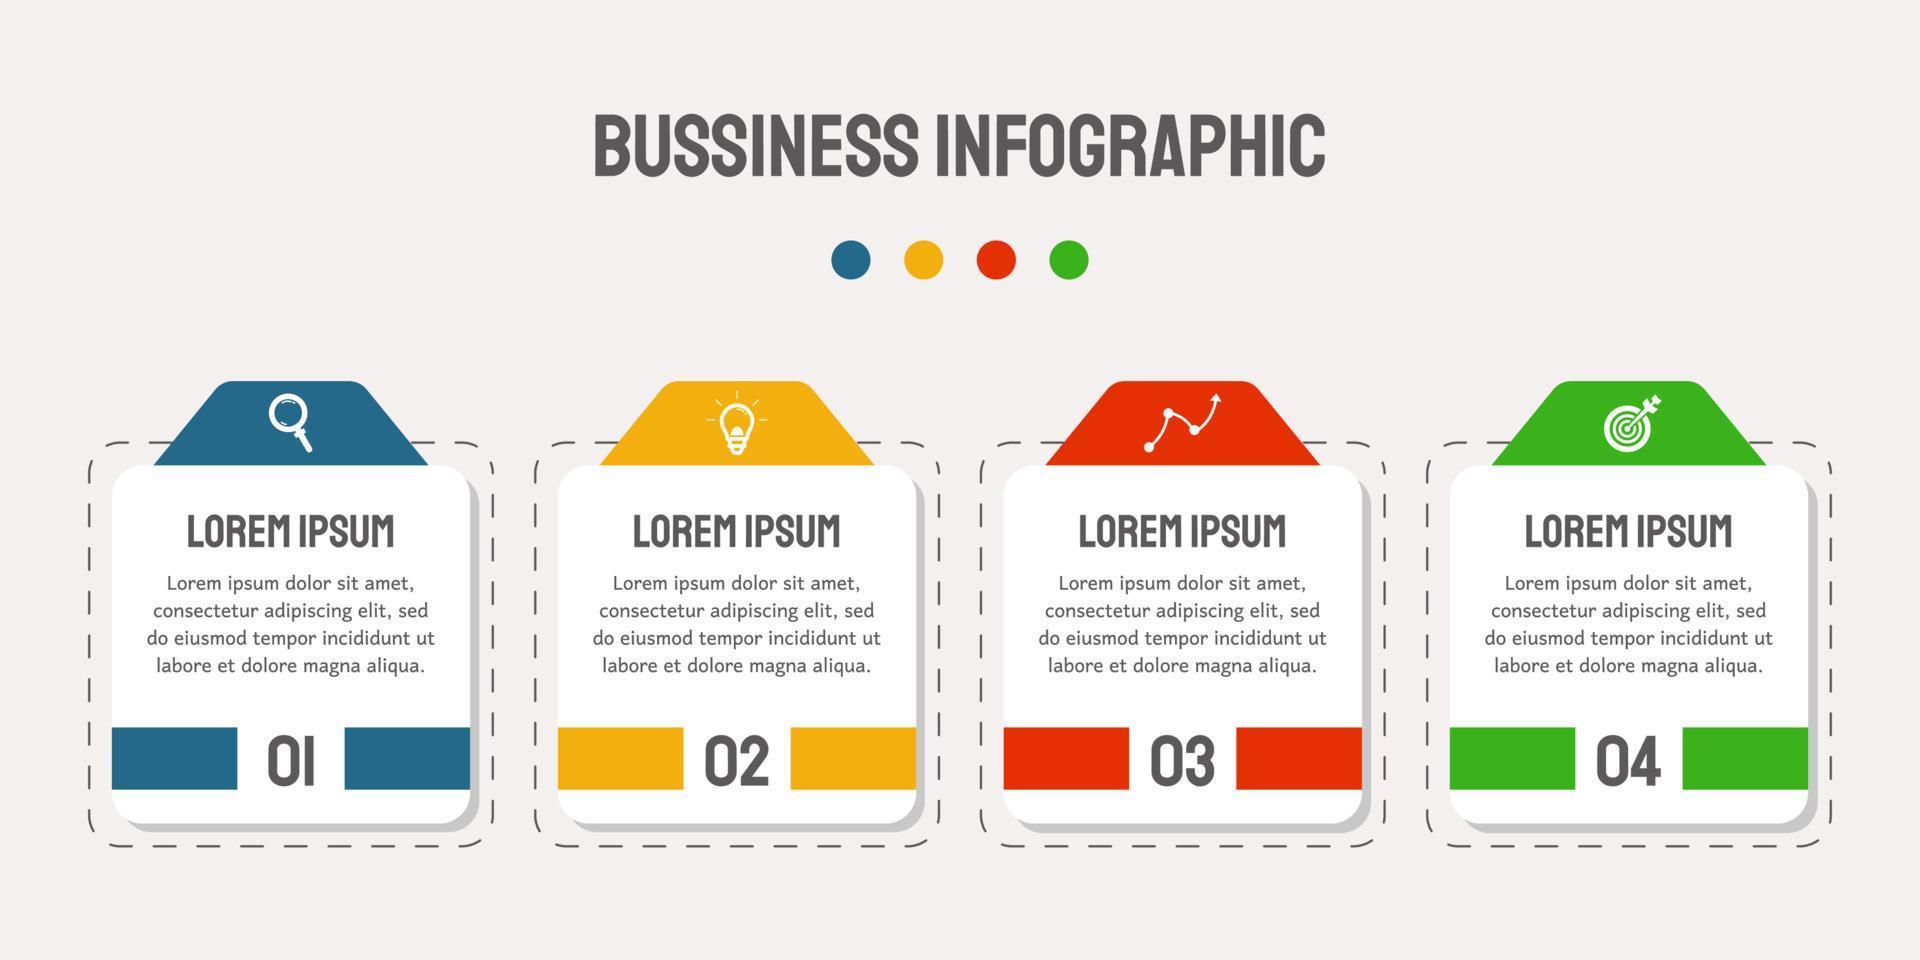 Vector bussiness infographic design with icons and 4 options or steps. Used for presentations.